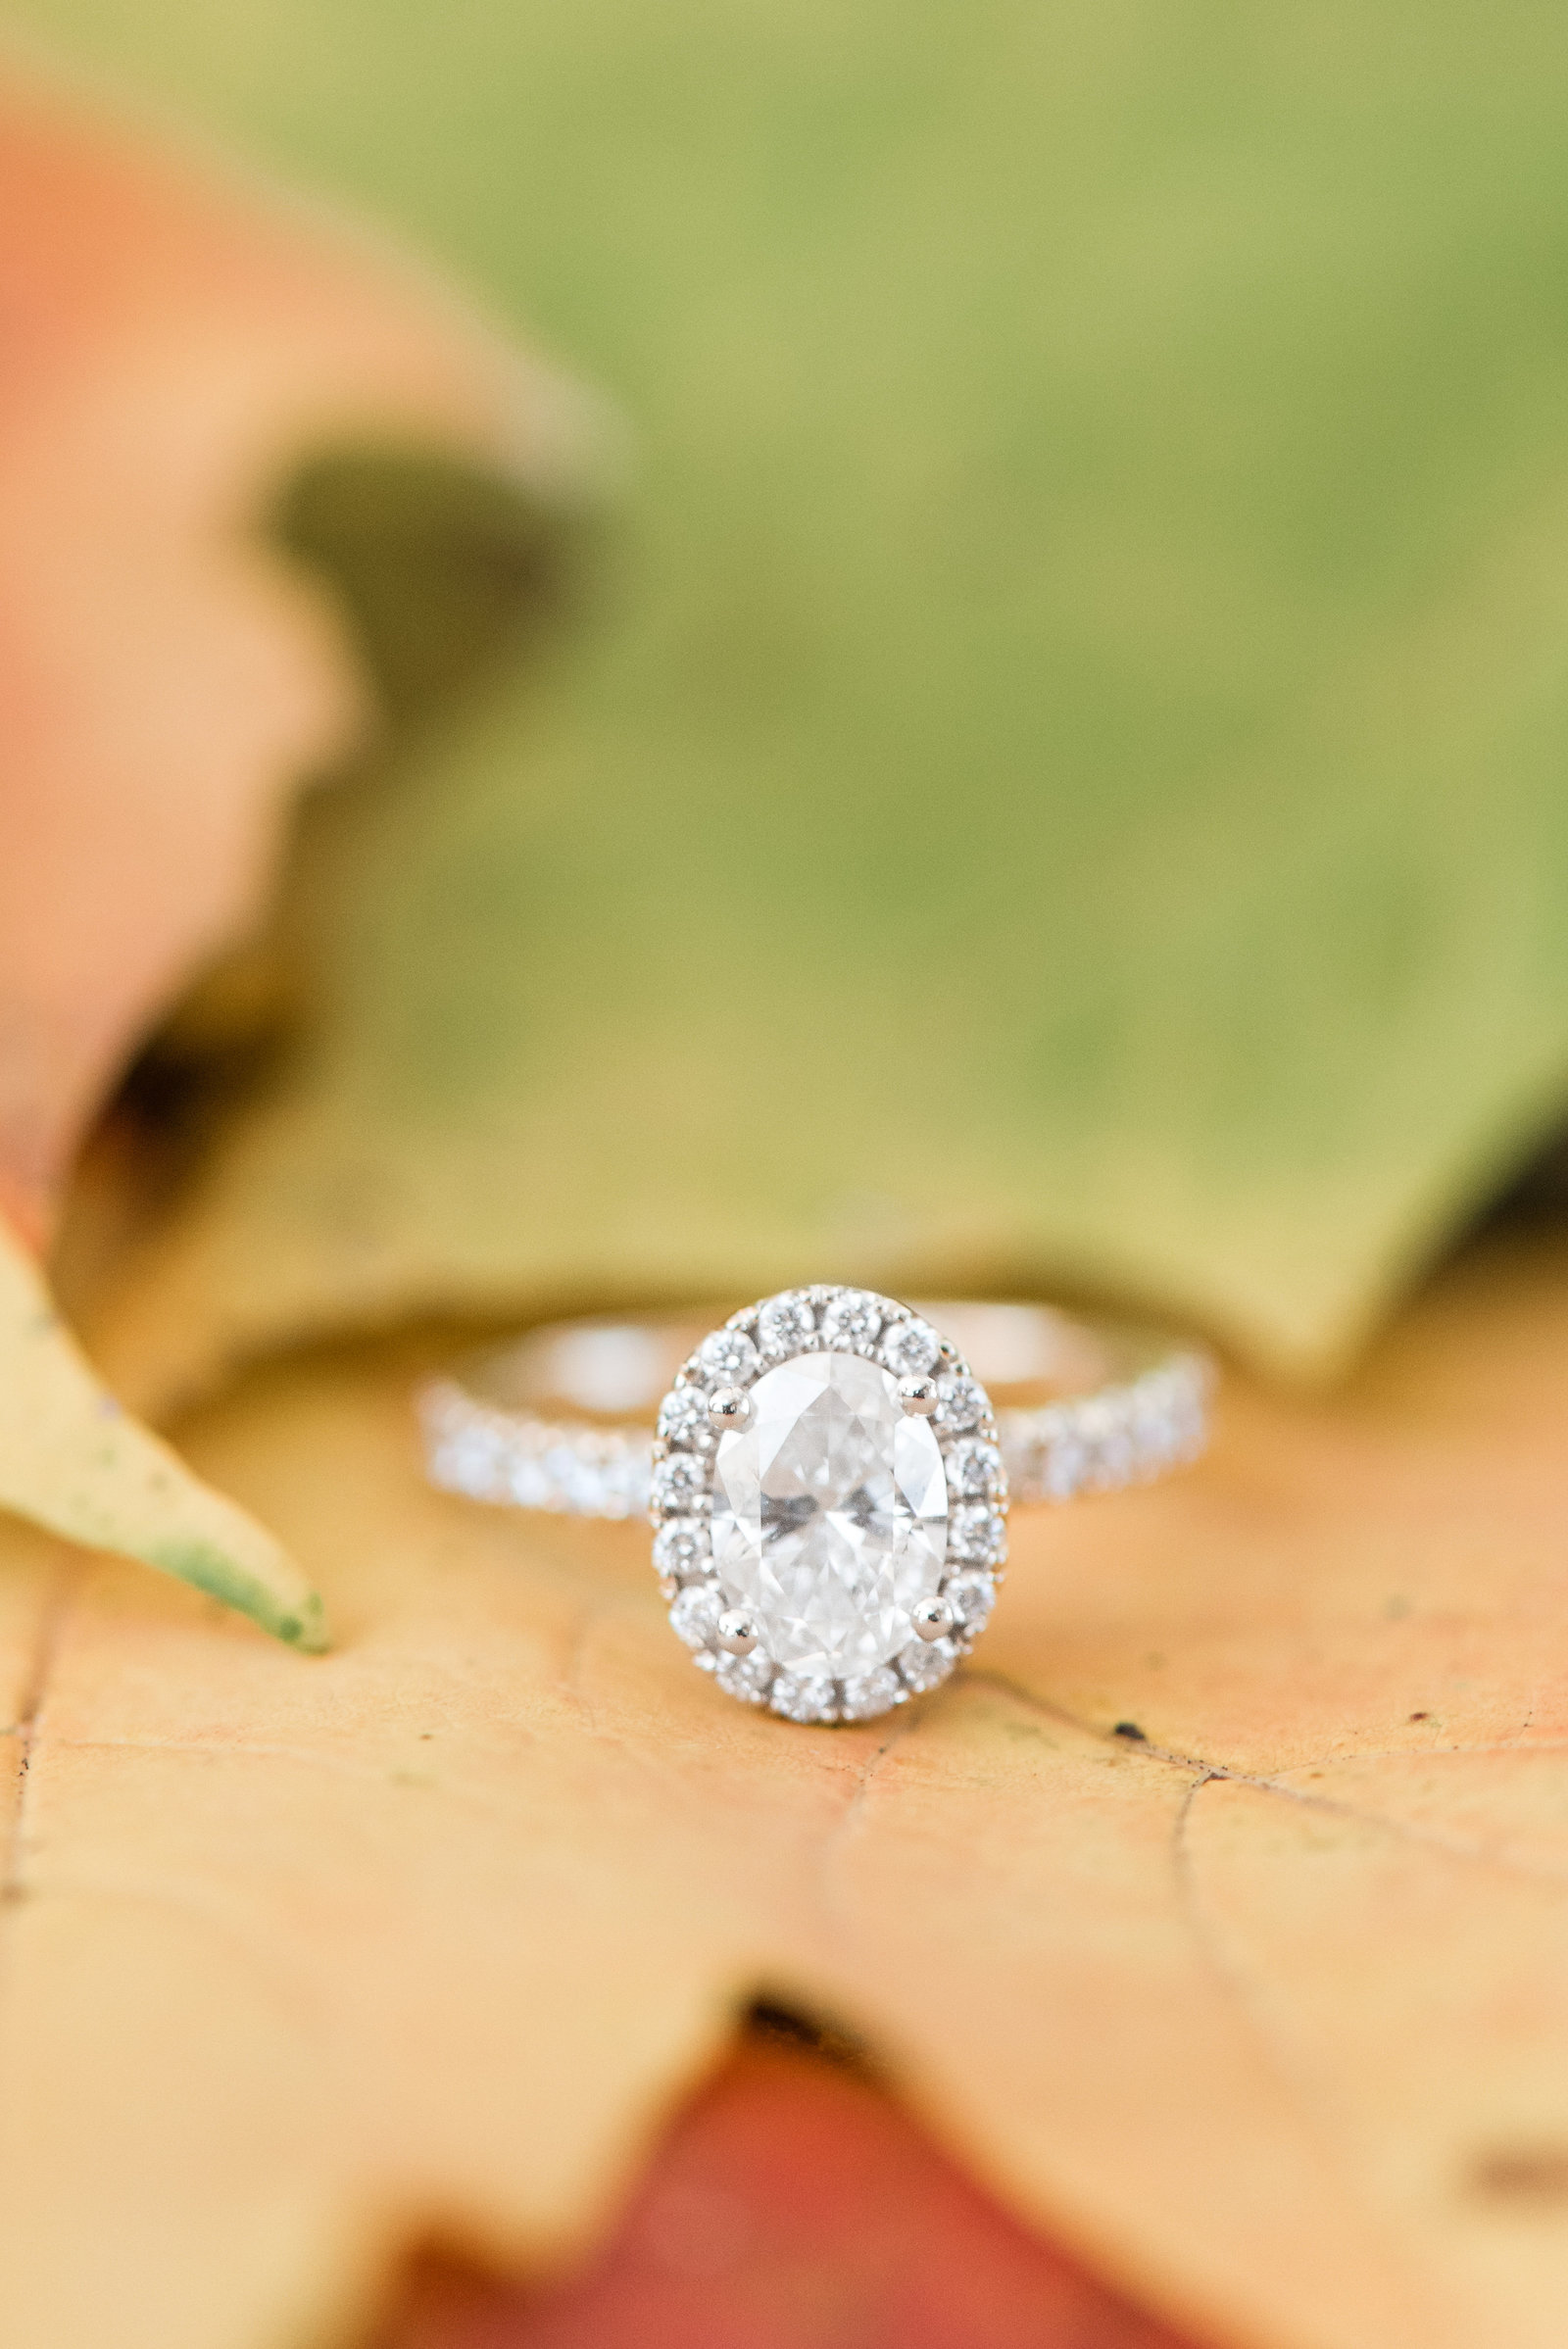 oval-diamond-engagement-ring-fall-leaves-photo849